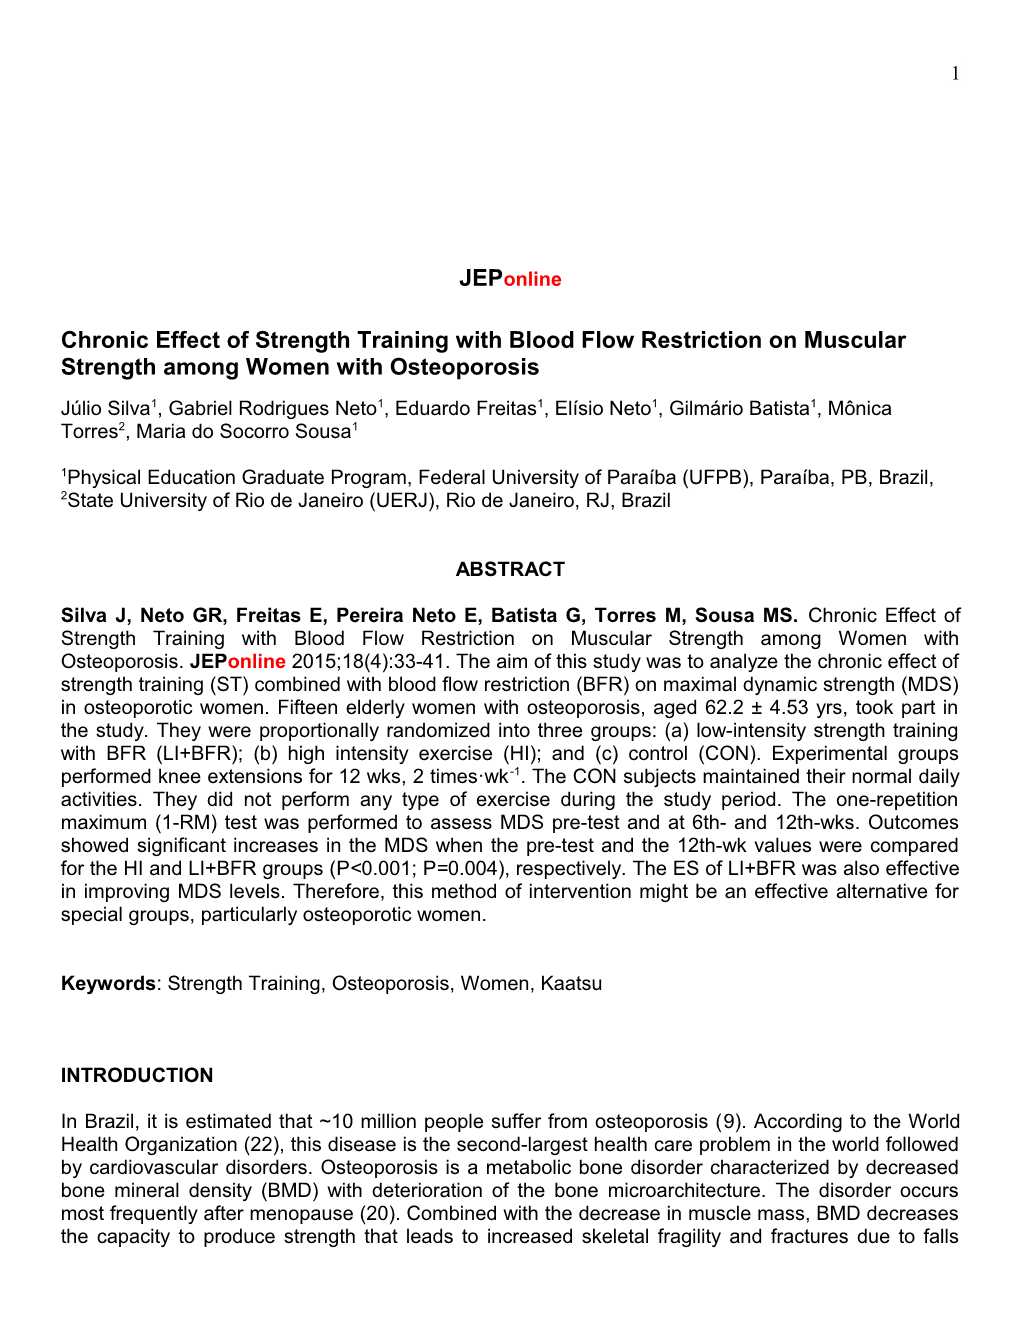 Chronic Effect of Strength Training with Blood Flow Restriction on Muscular Strengthamongwomen